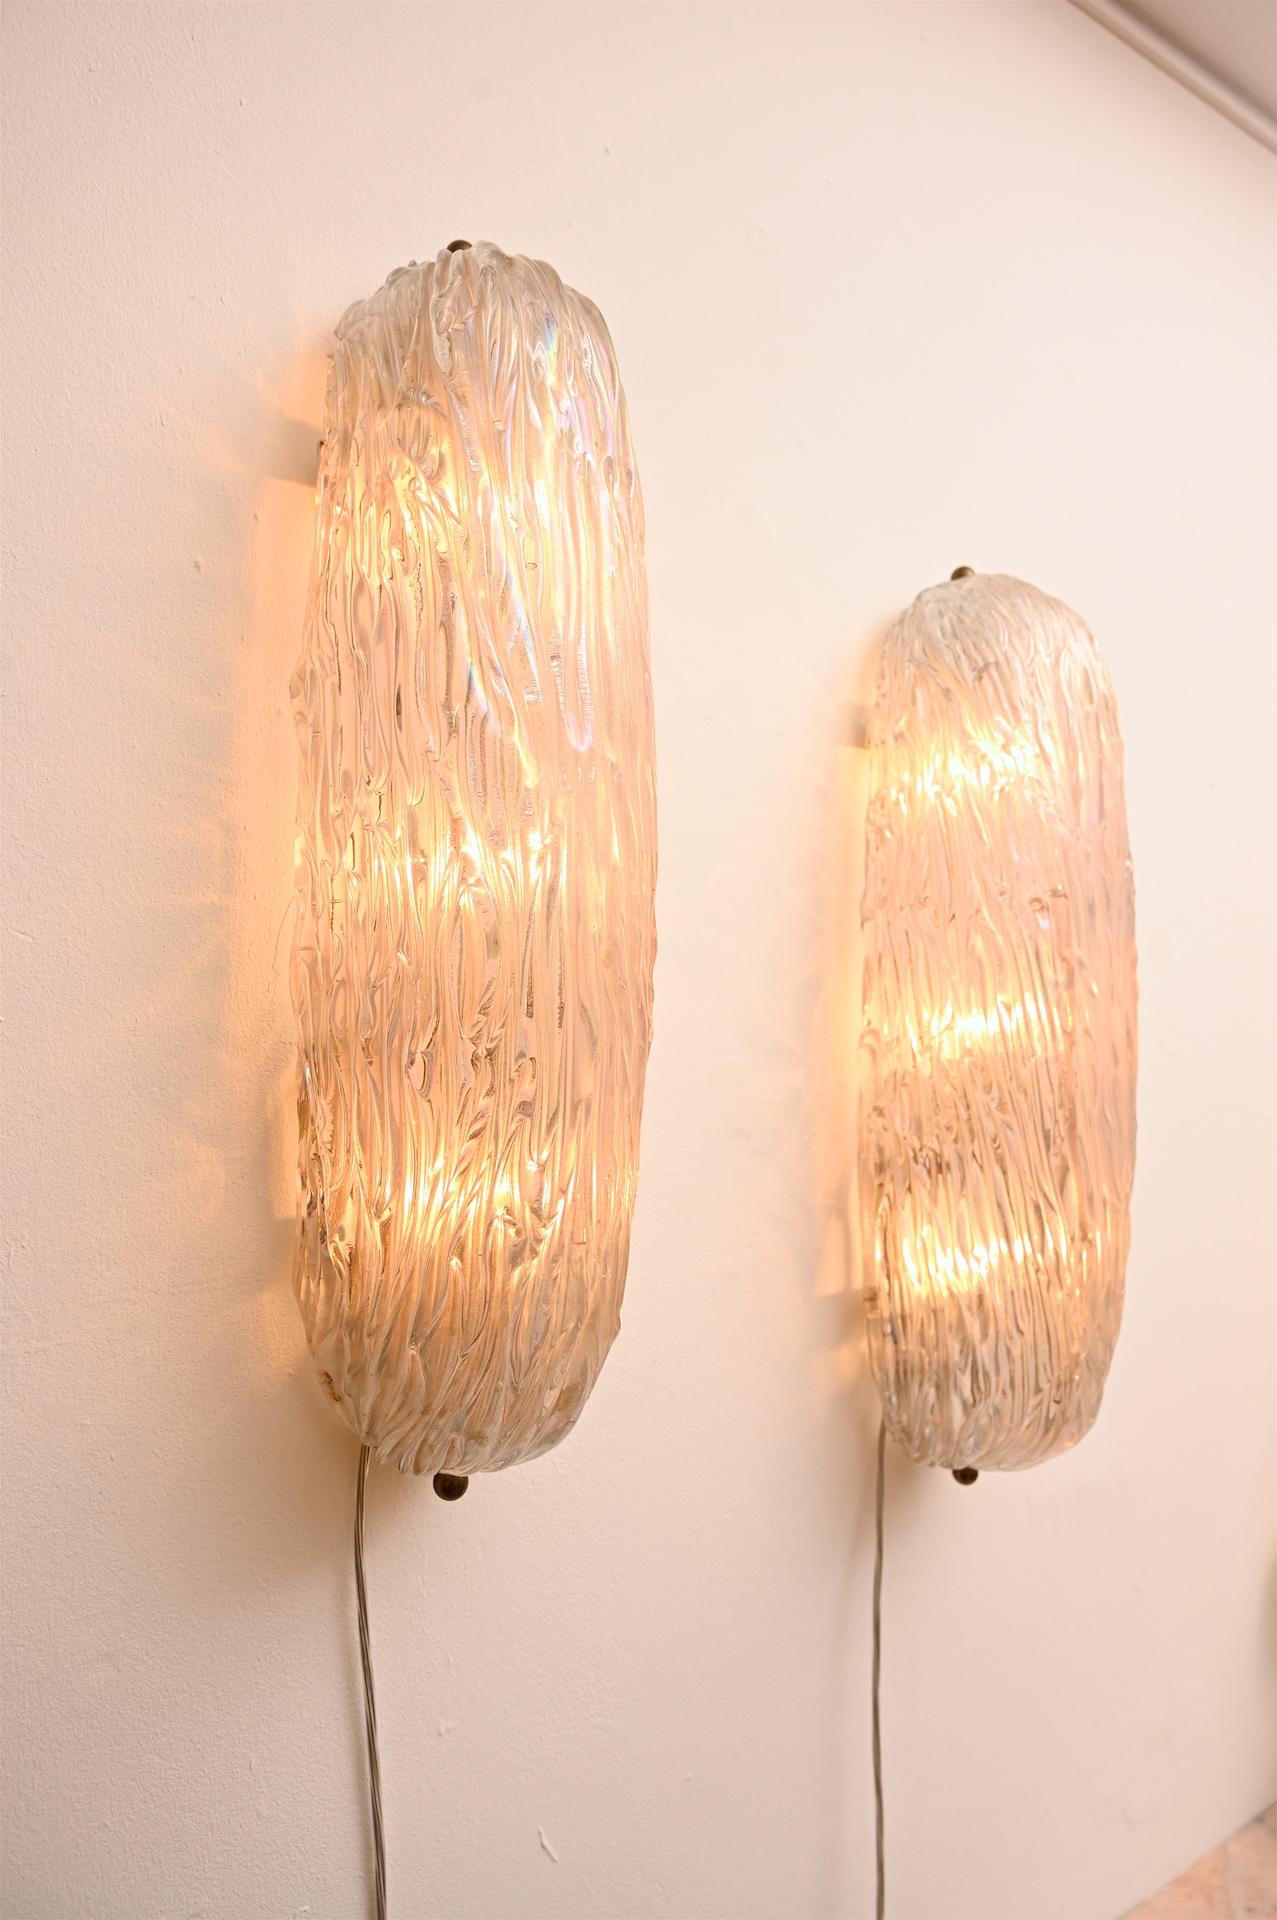 Beautiful textured opalescent glass wall lights by Carlo Scarpa.